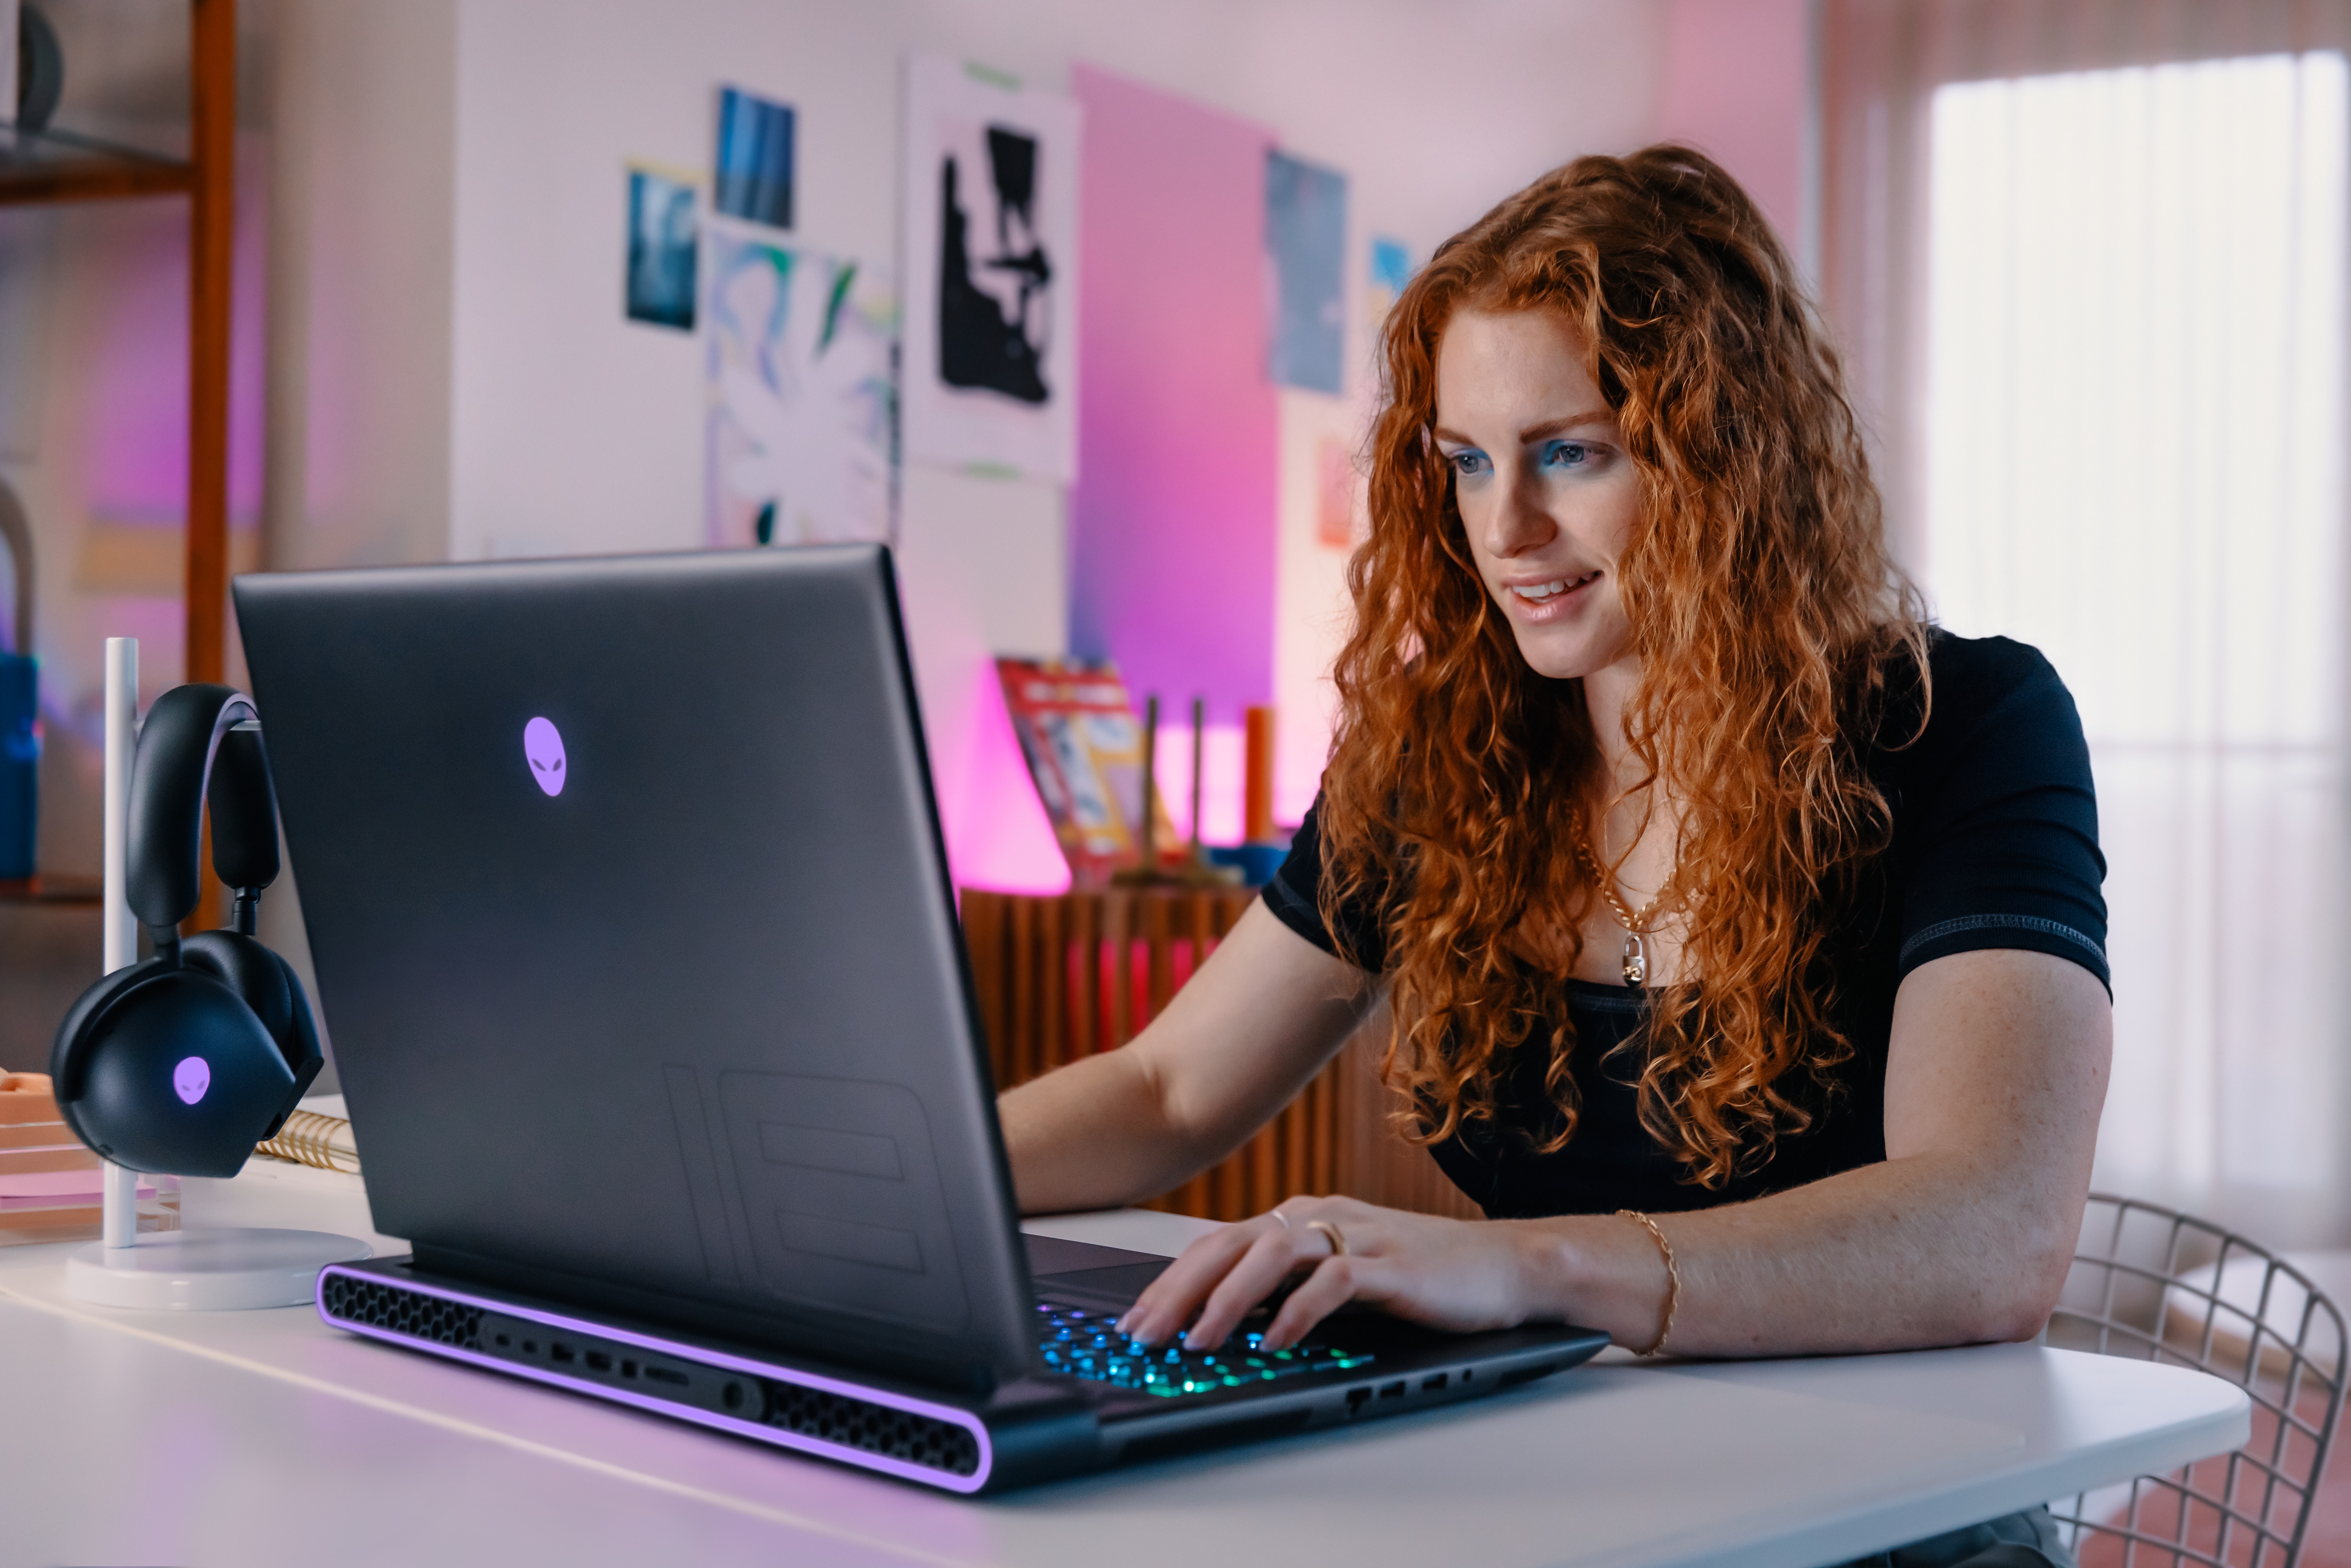 Woman in a bright room using an Alienware gaming laptop with headphones hanging next to her.